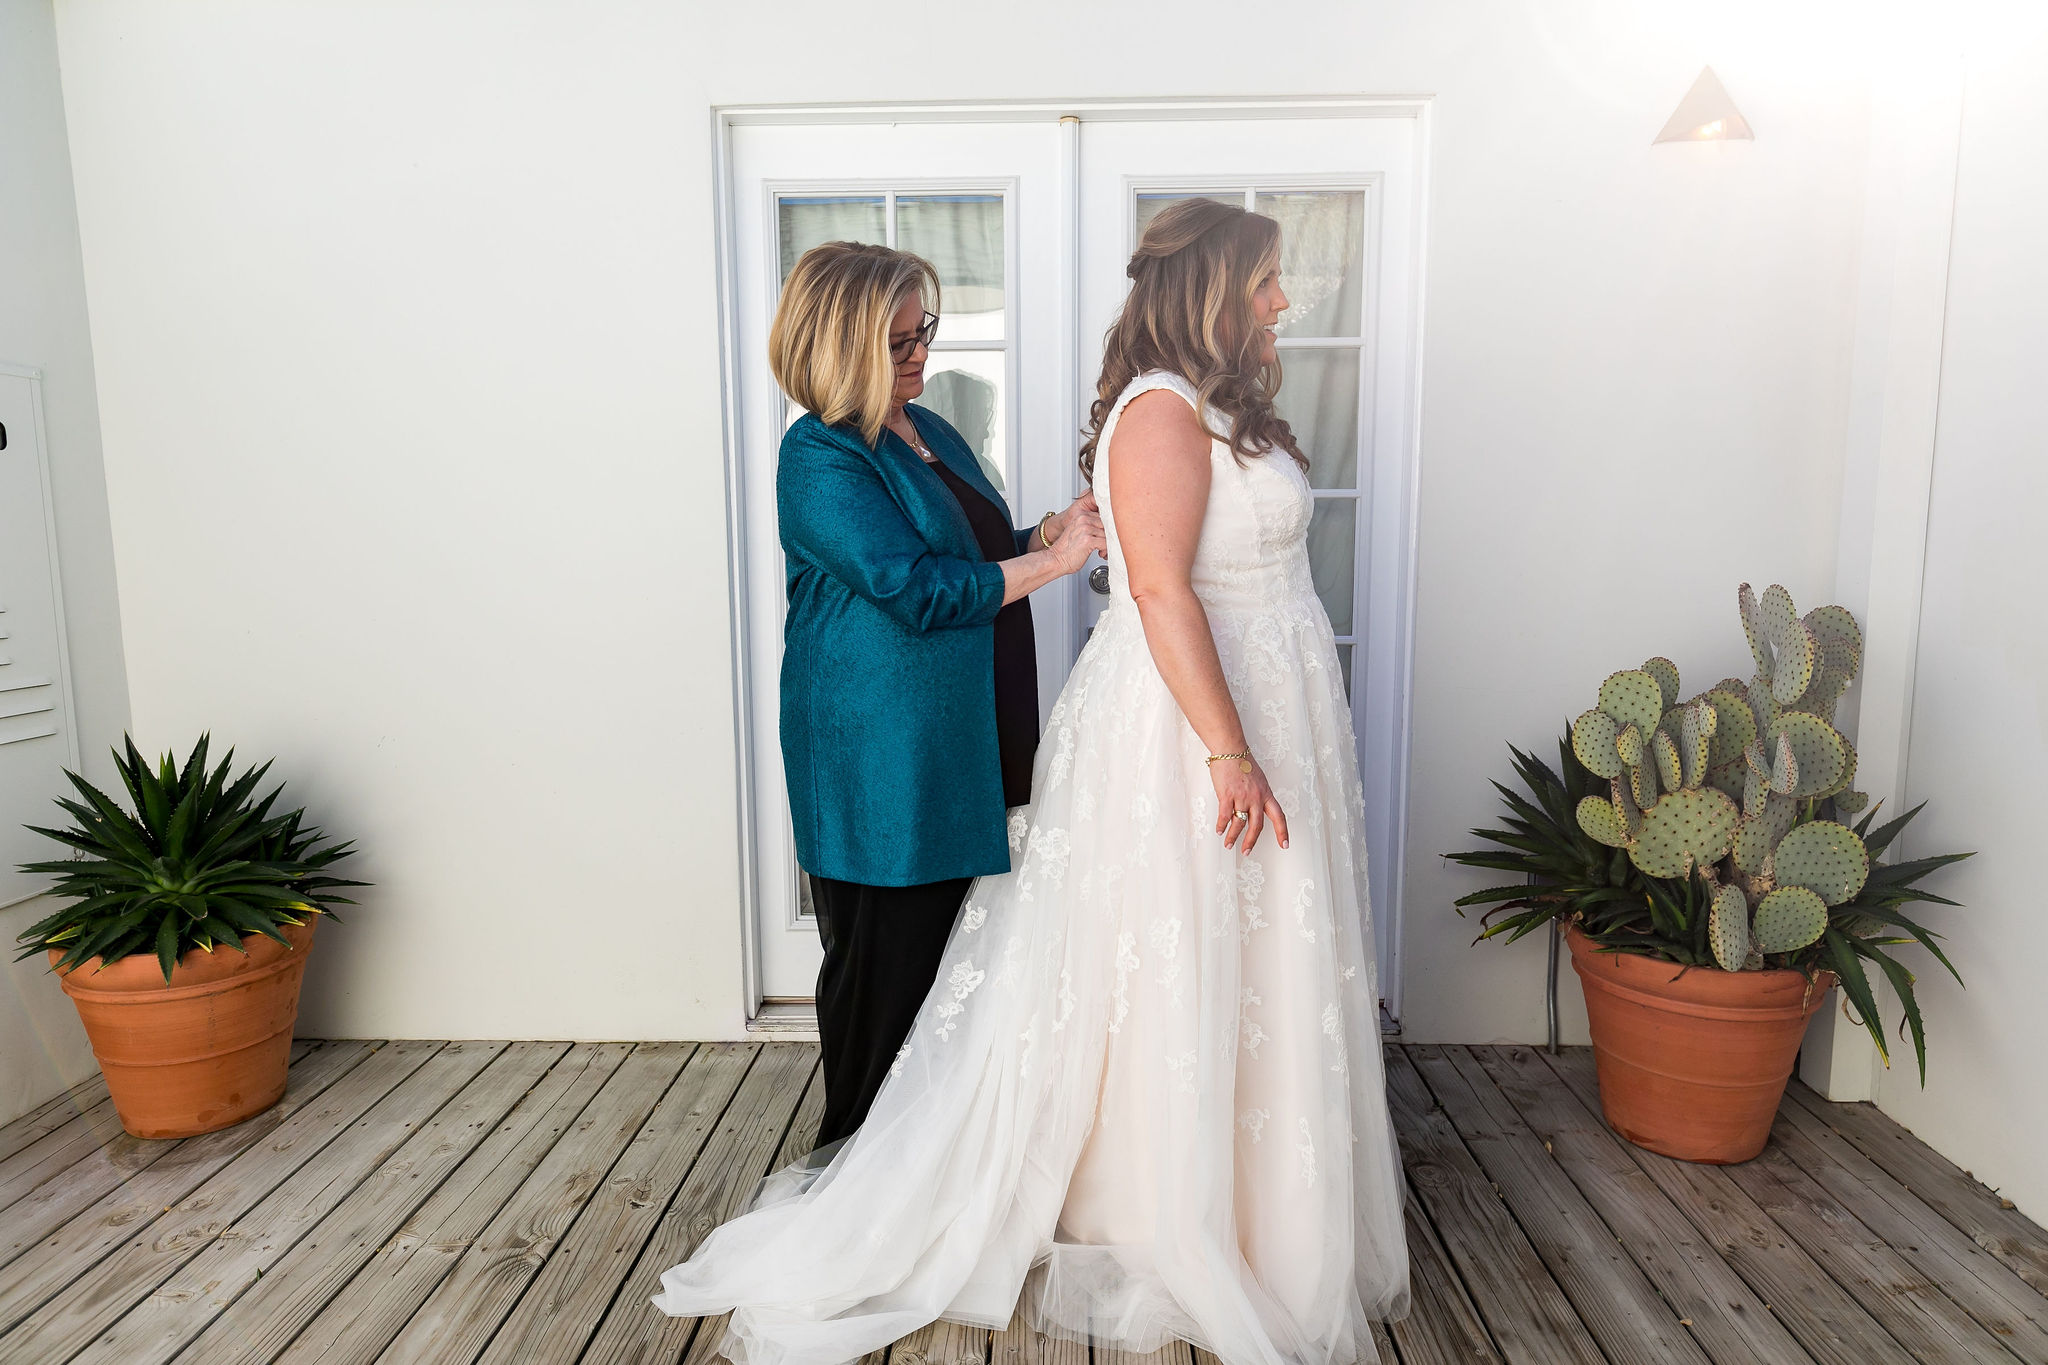 mother of bride helping bride into her lace dress before wedding day